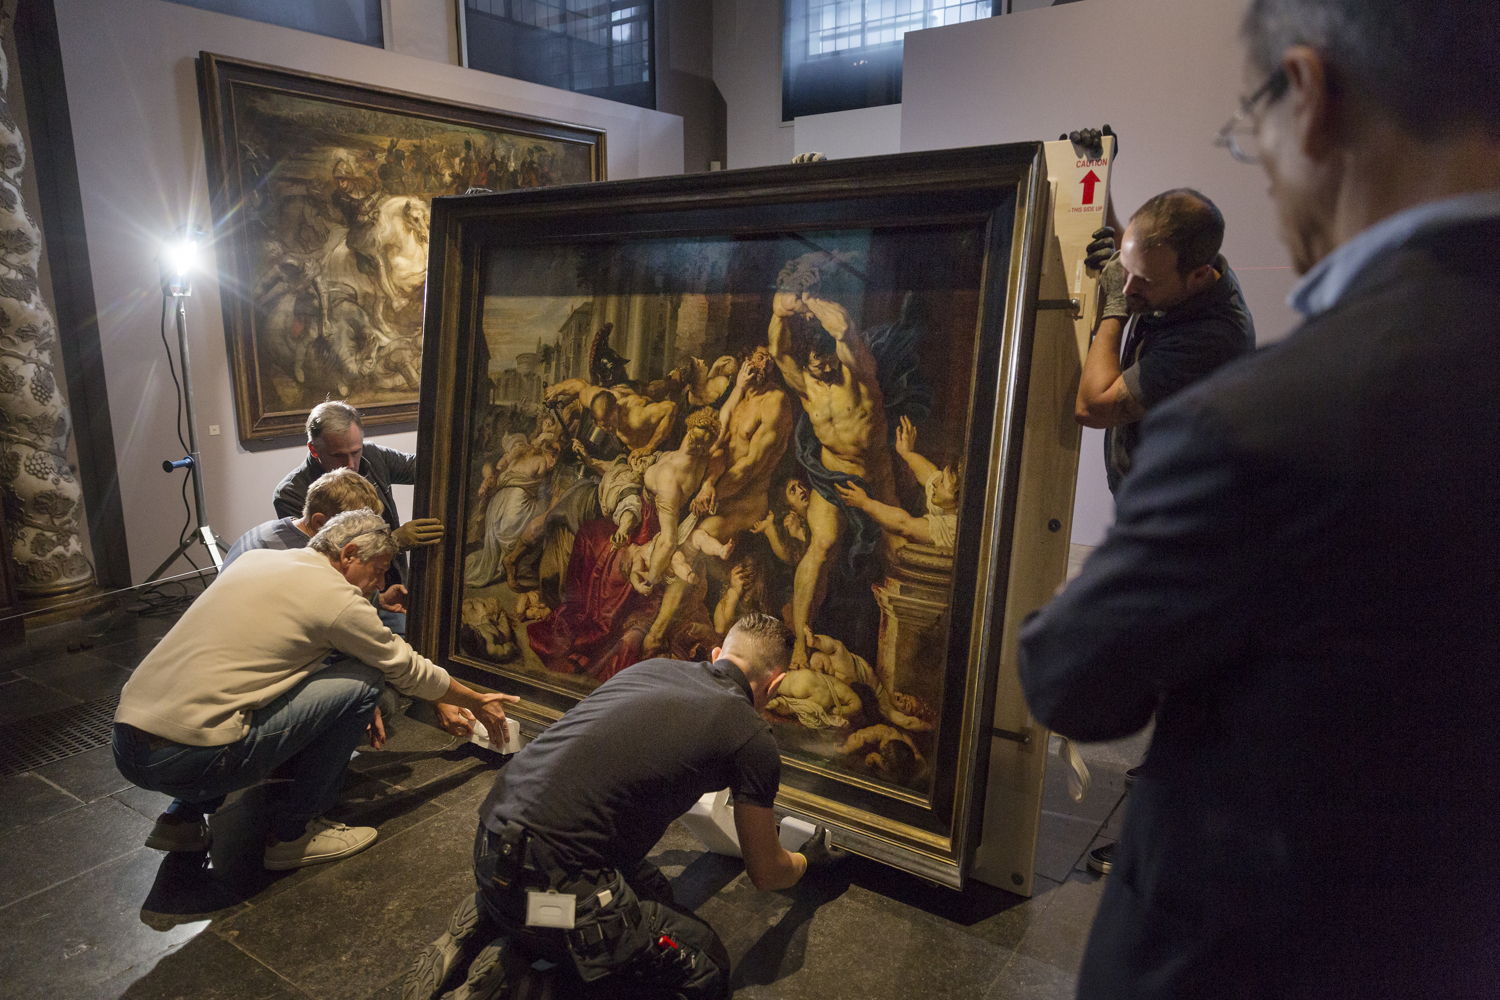 Image name: 30_Rubens, Arrival of the Massacre at the Rubens House, The Thomson Collection at the Art Gallery of Ontario, Art Gallery of Ontario, photo Ans Brys.jpg